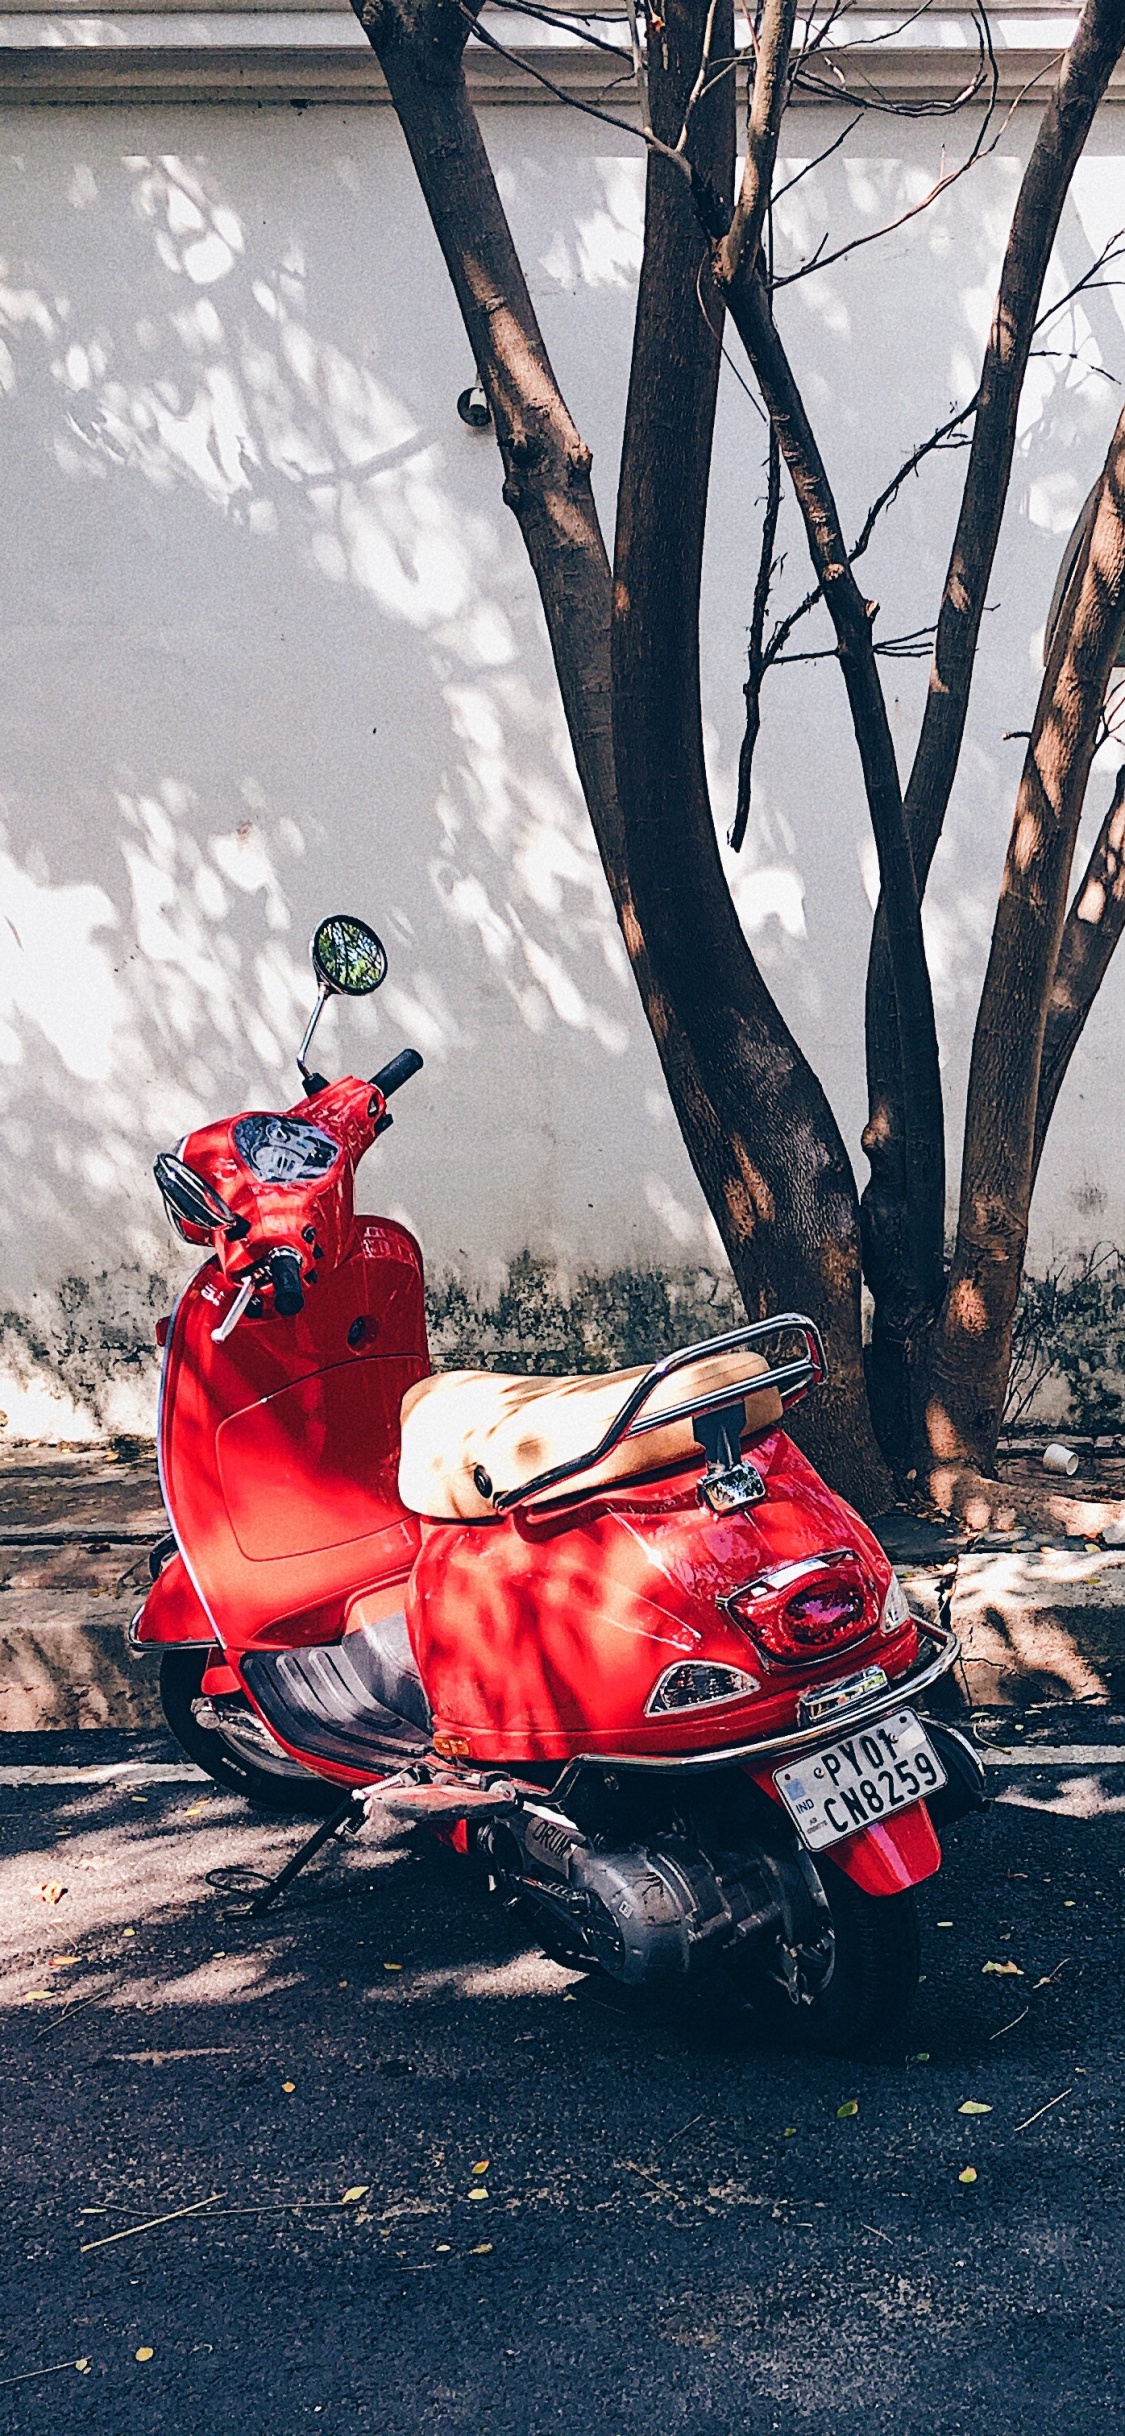 Man in Red Jacket Riding Red Motor Scooter on Road During Daytime. Wallpaper in 1125x2436 Resolution